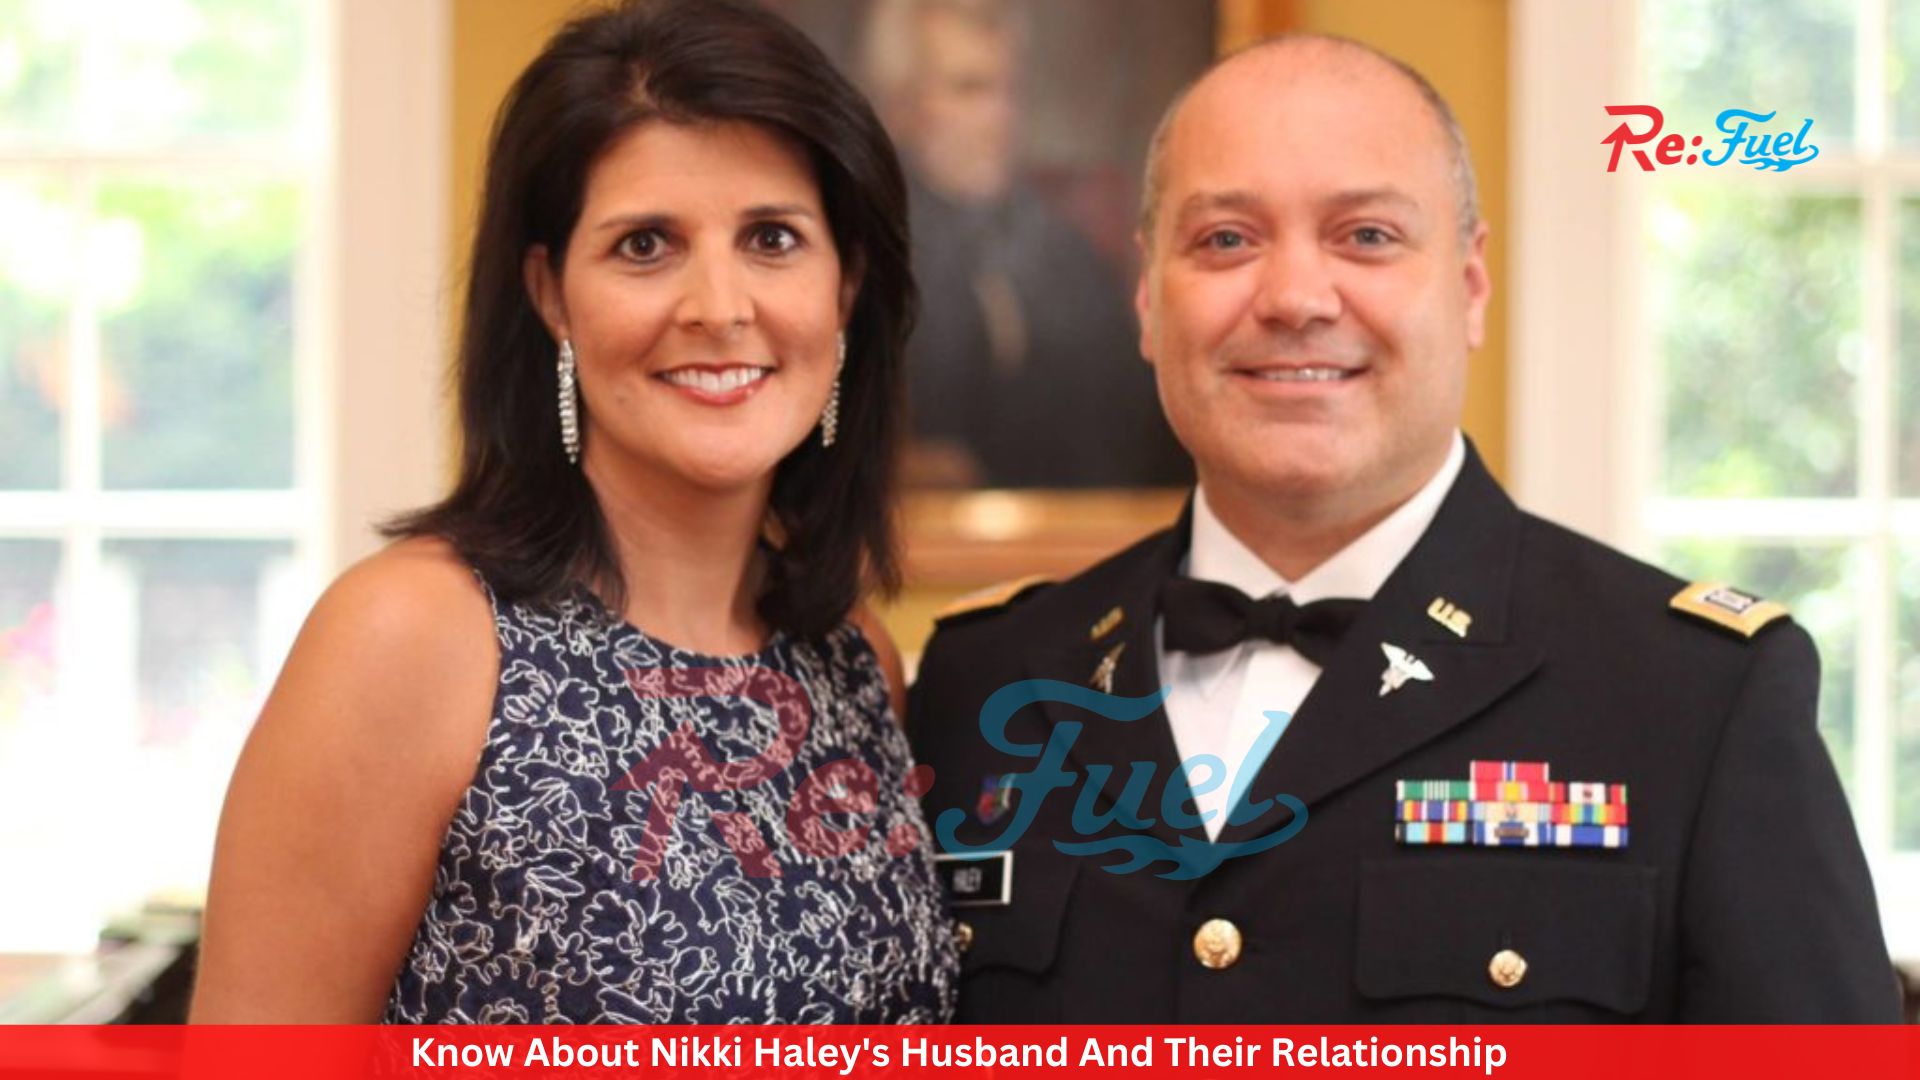 Know About Nikki Haley's Husband And Their Relationship